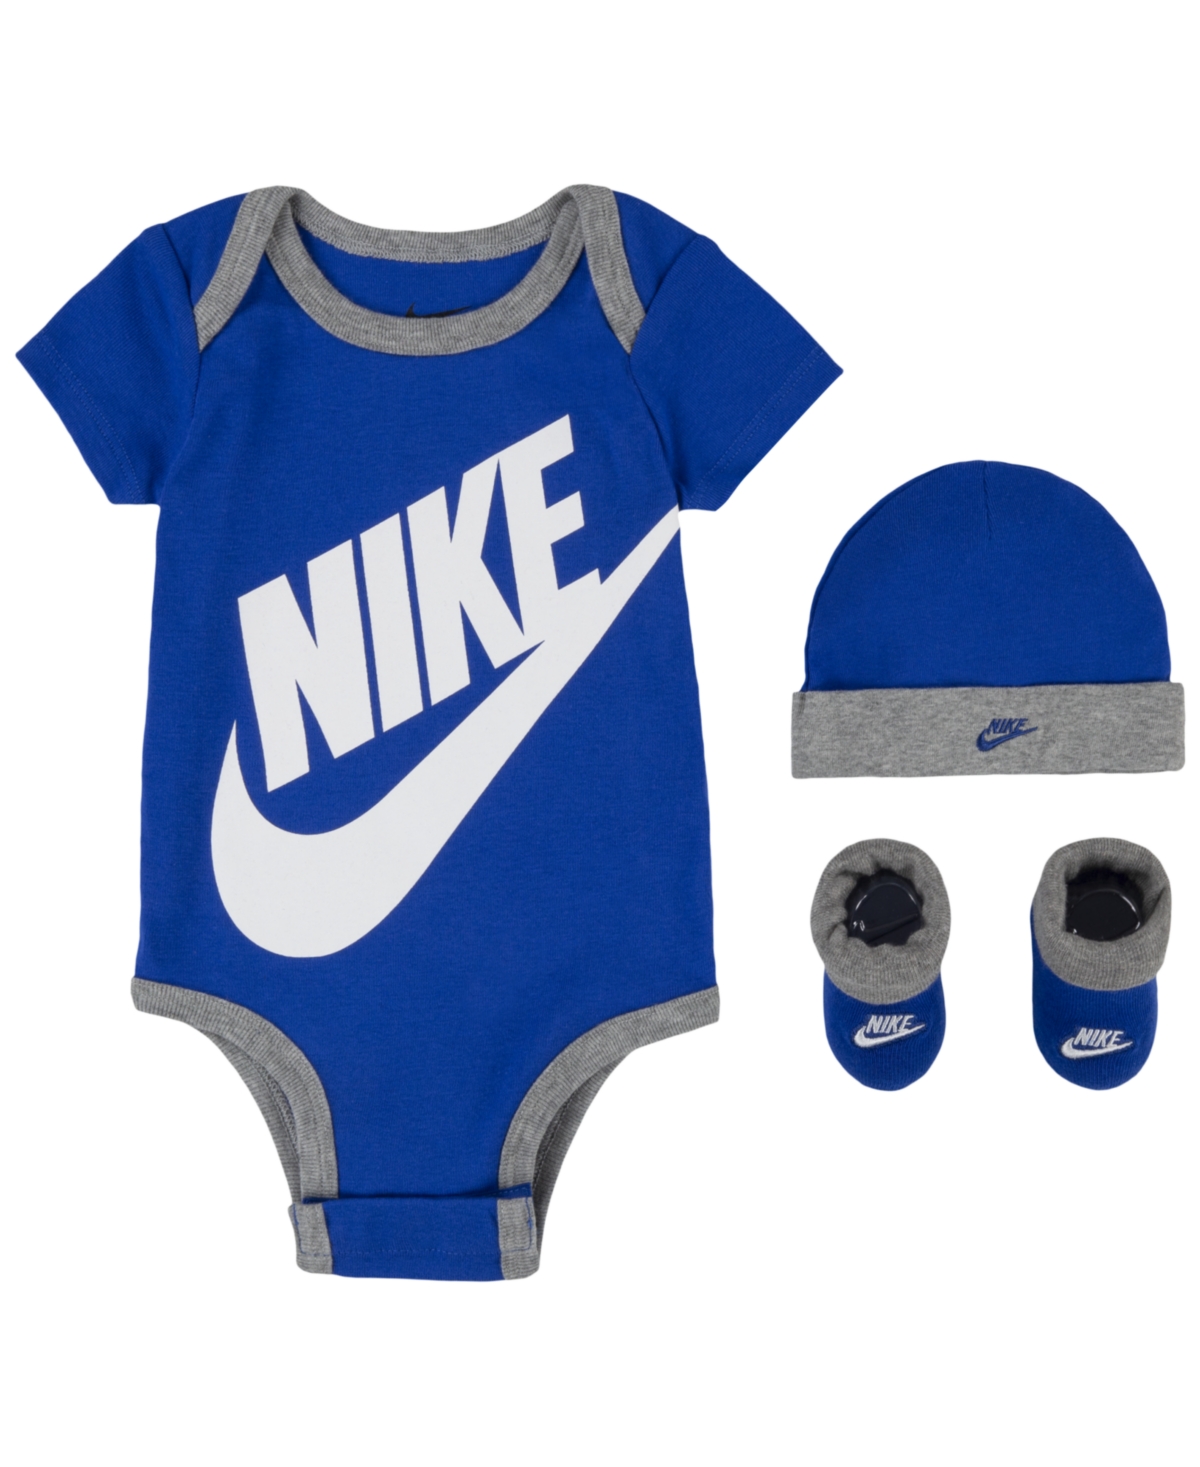 Nike Baby Boys Or Baby Girls Futura Logo Bodysuit, Beanie, And Booties, 3 Piece Gift Box Set In Game Royal